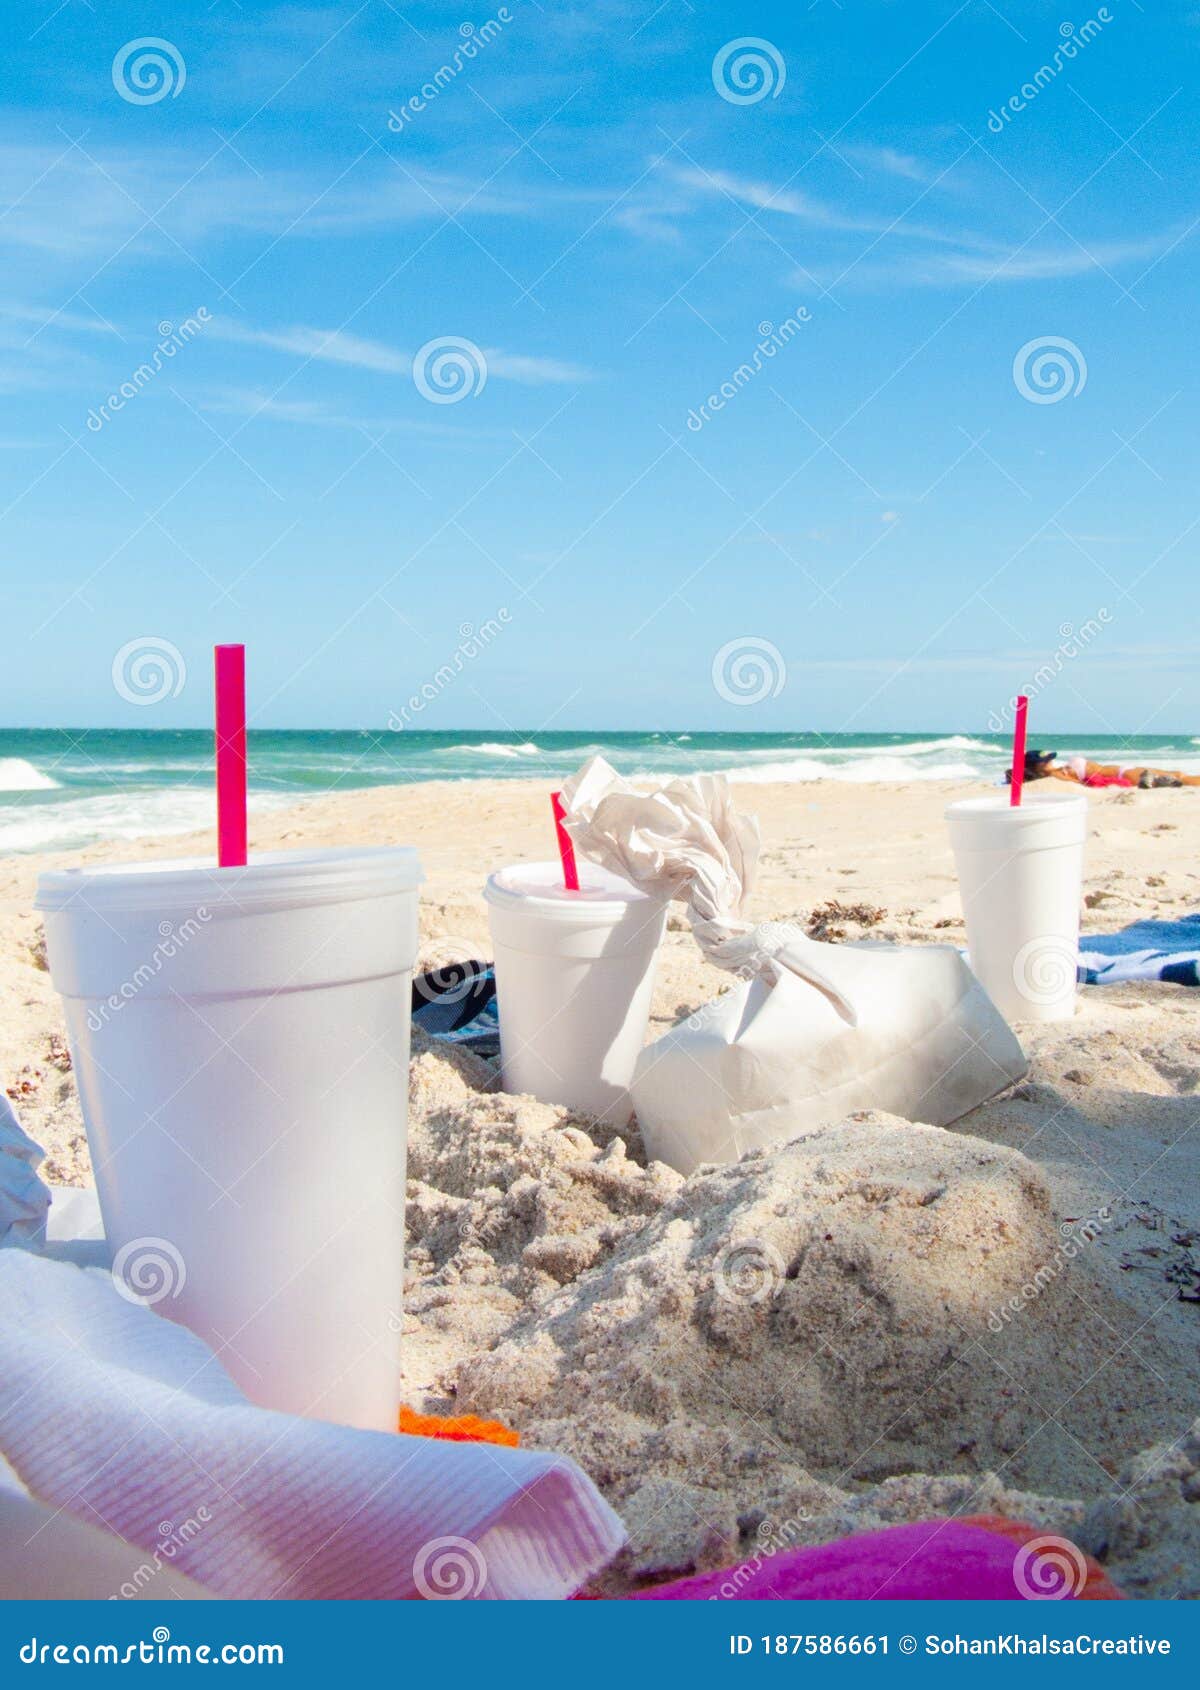 Fast Food Containers and Drink Cups on the Beach with Towels and